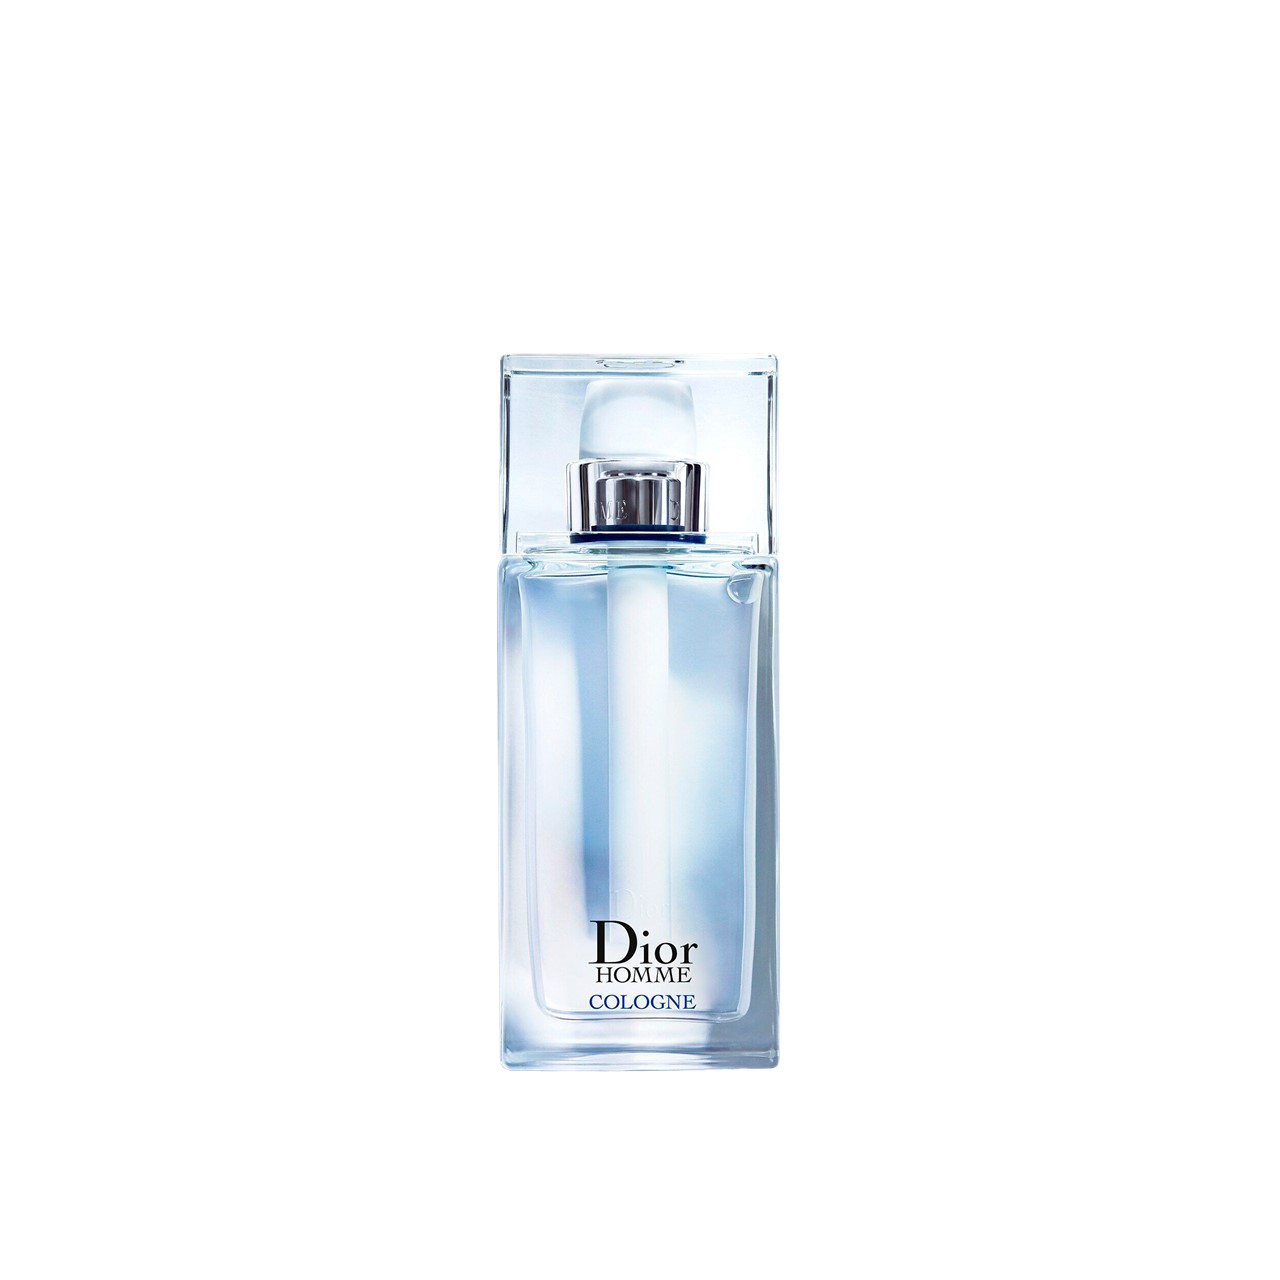 Buy Dior Homme Cologne · USA